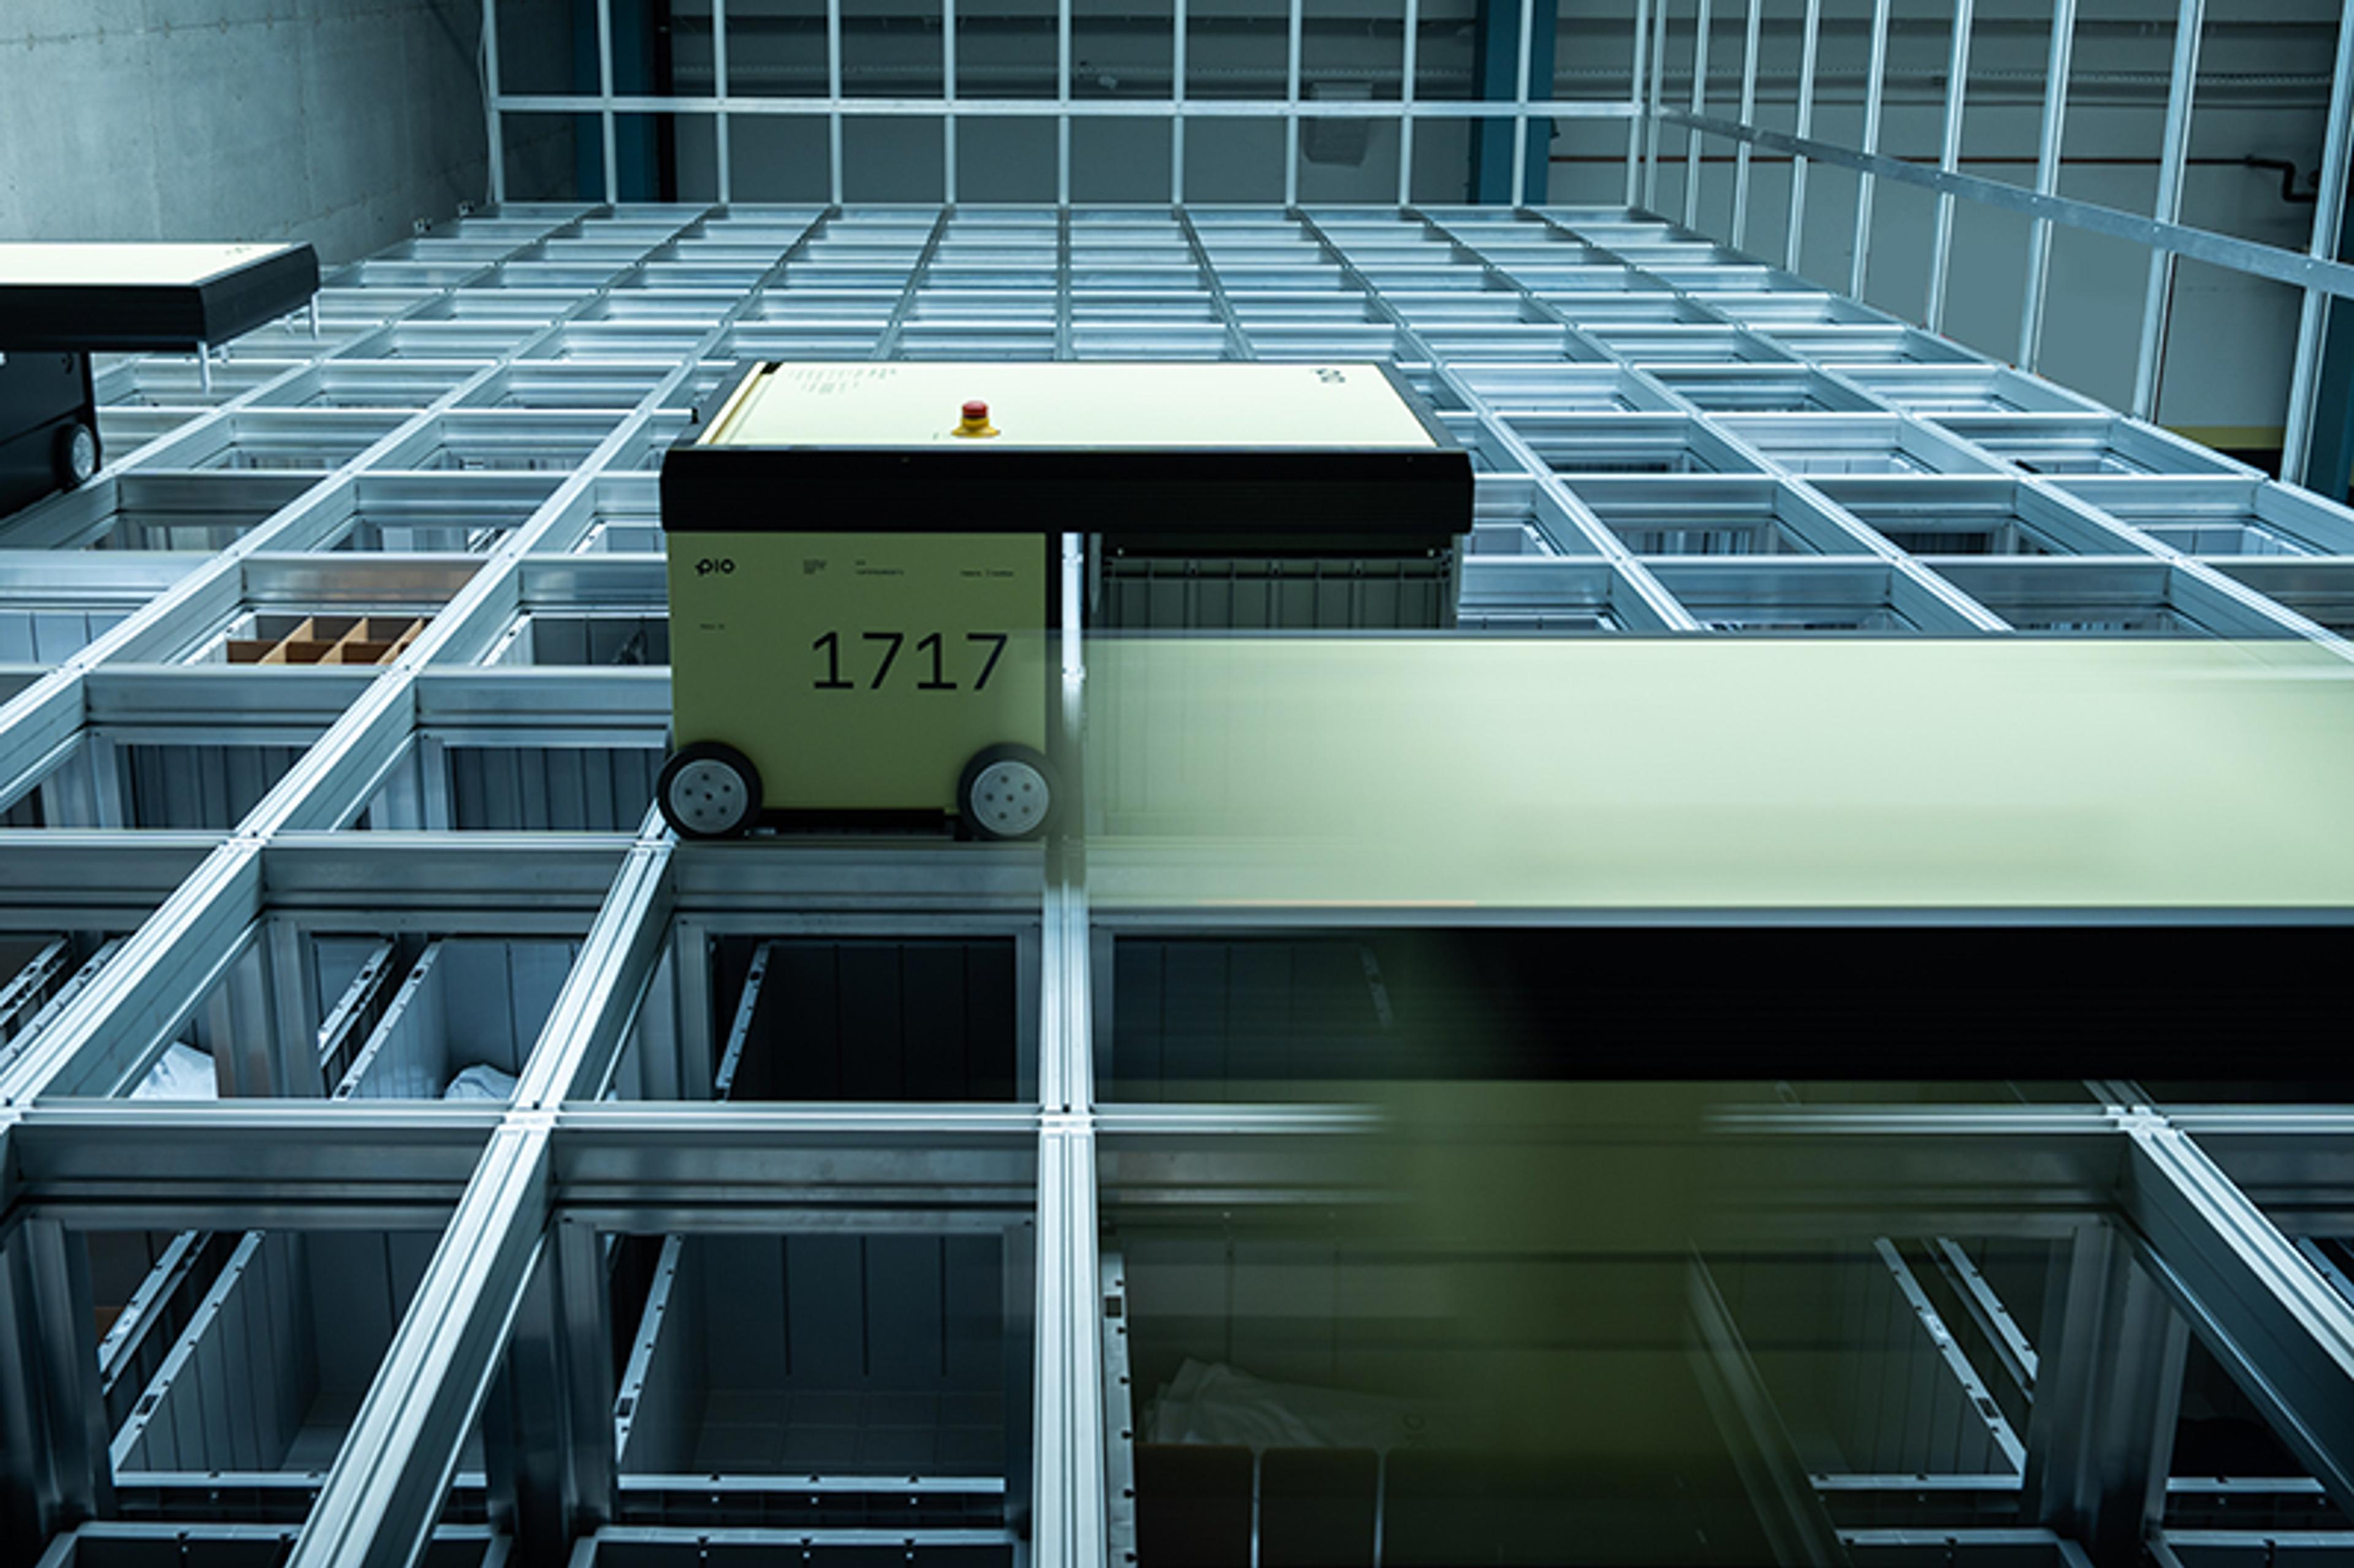 How to save energy and costs in your warehouse by using warehouse automation such as Pio